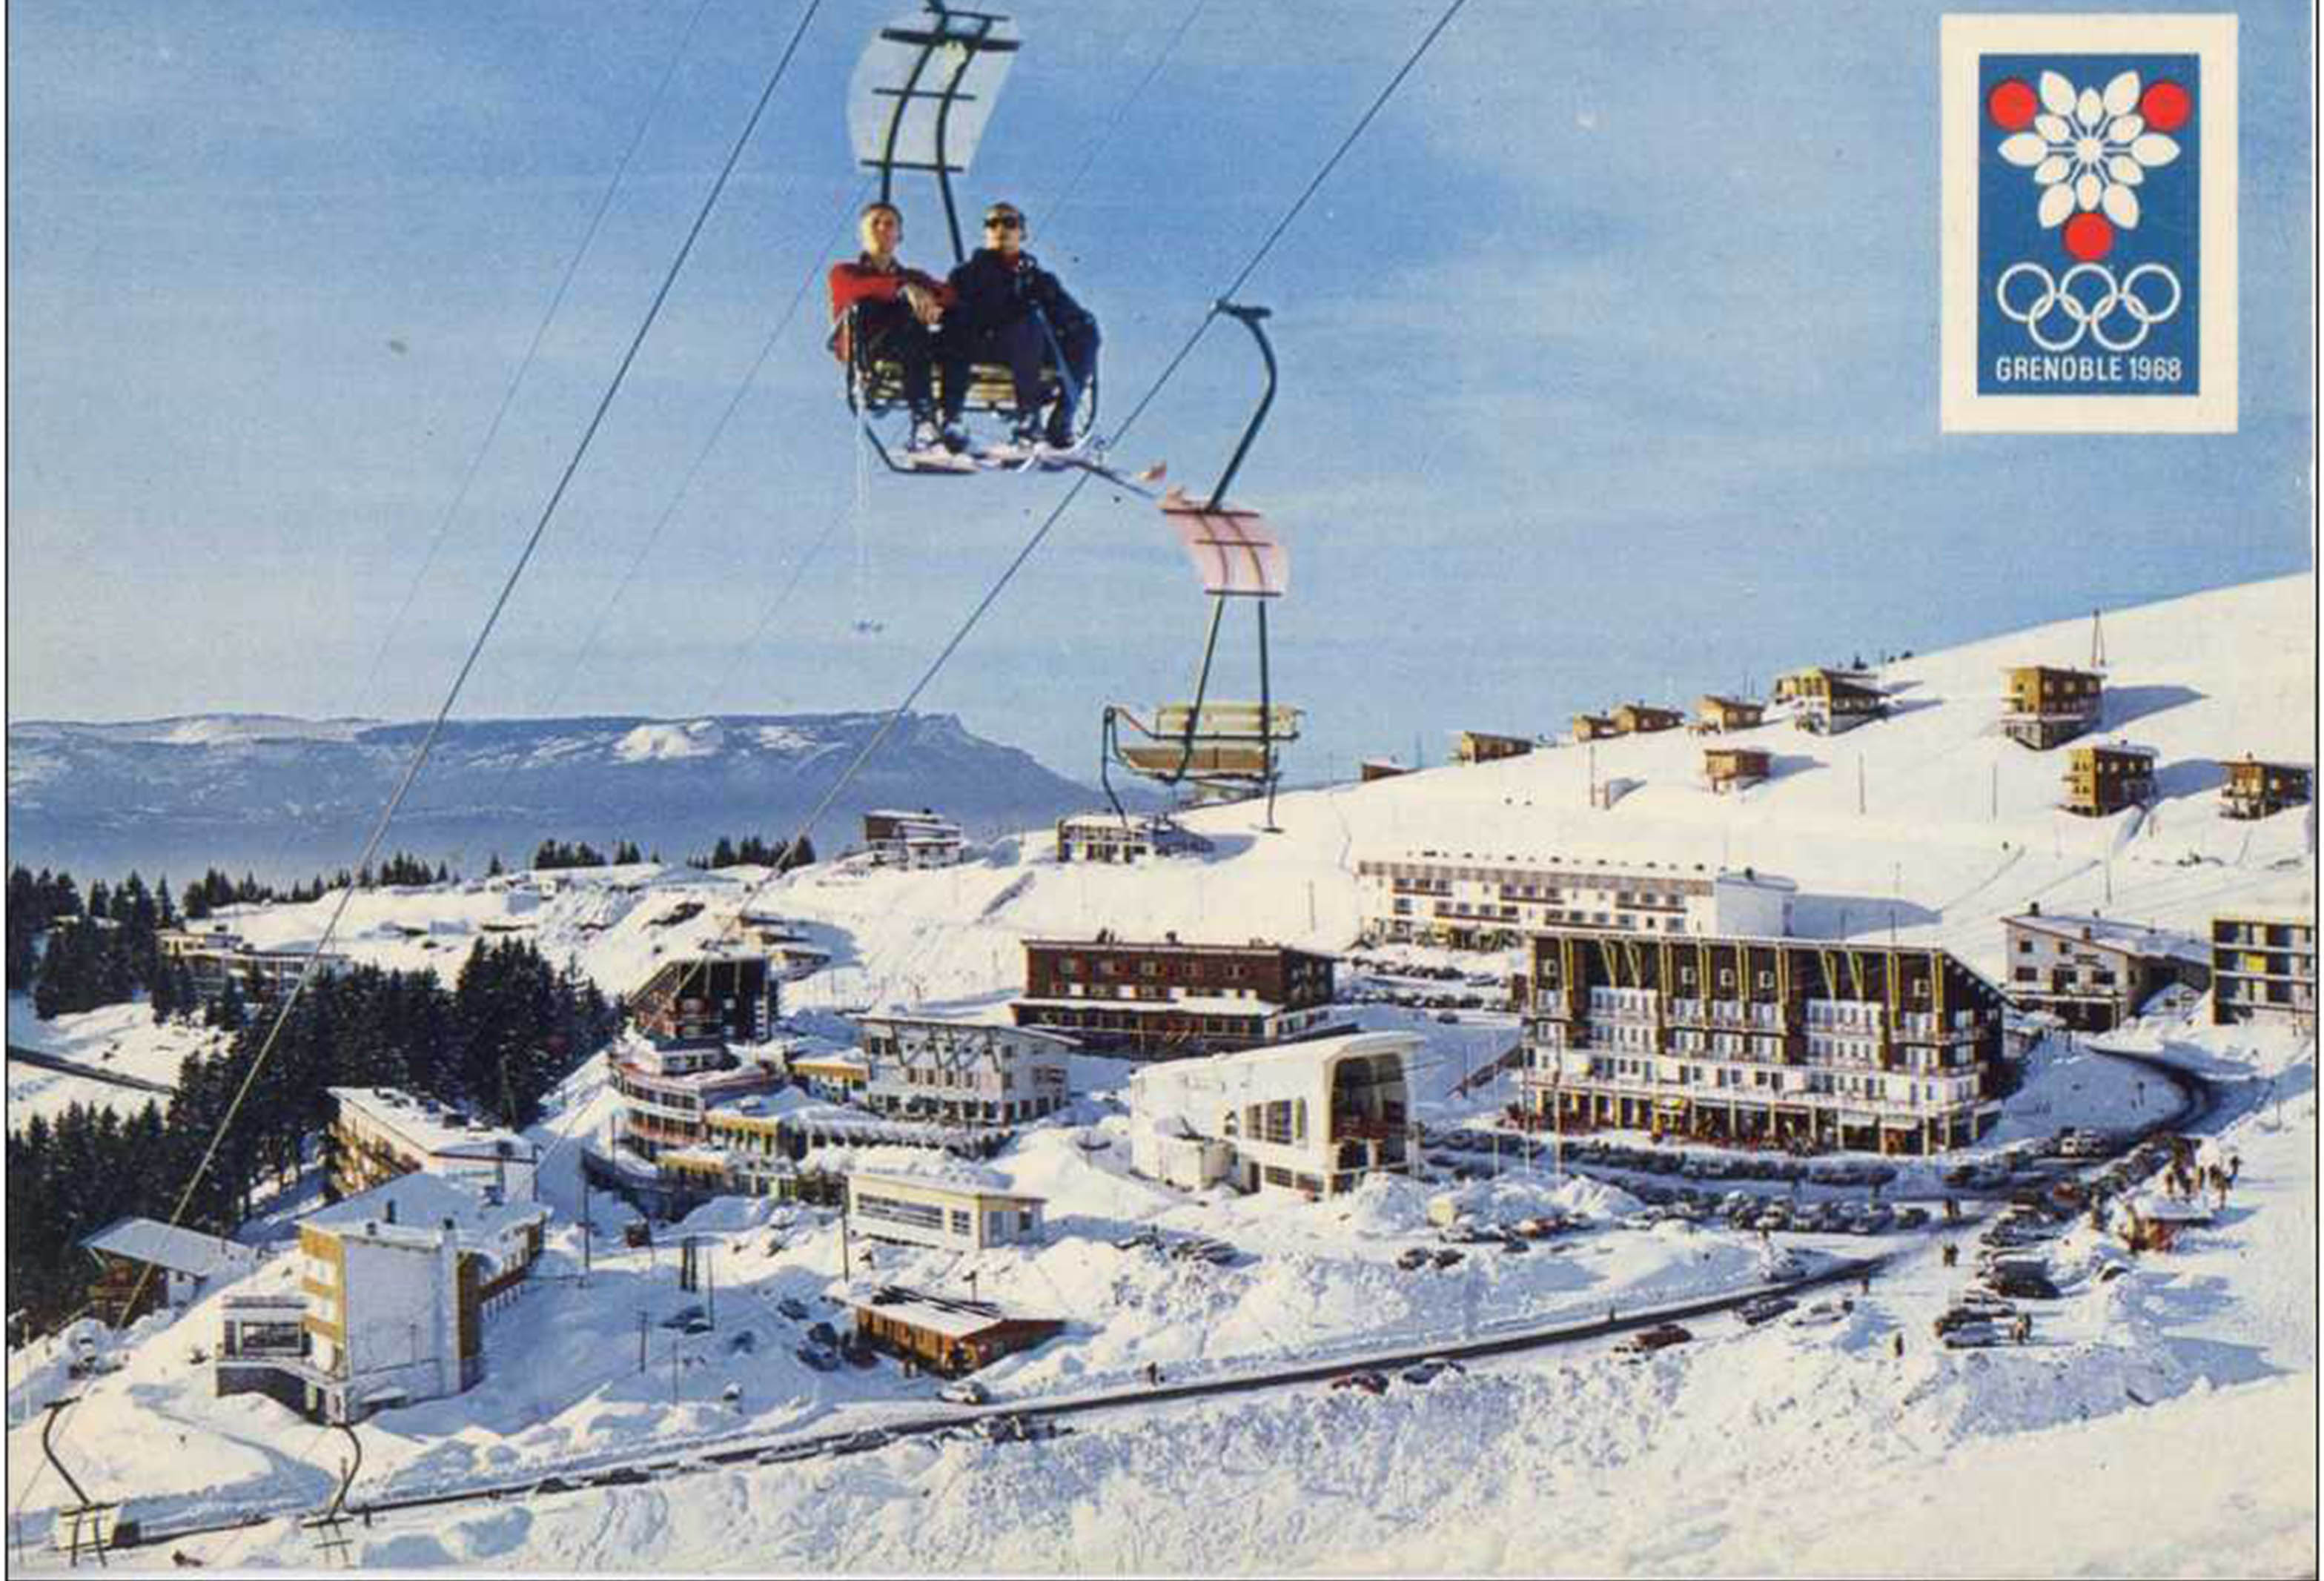 Chamrousse olympic games winter Olympics 1969 grenoble ski resort mountain grenoble isere french alps france - © Editions André